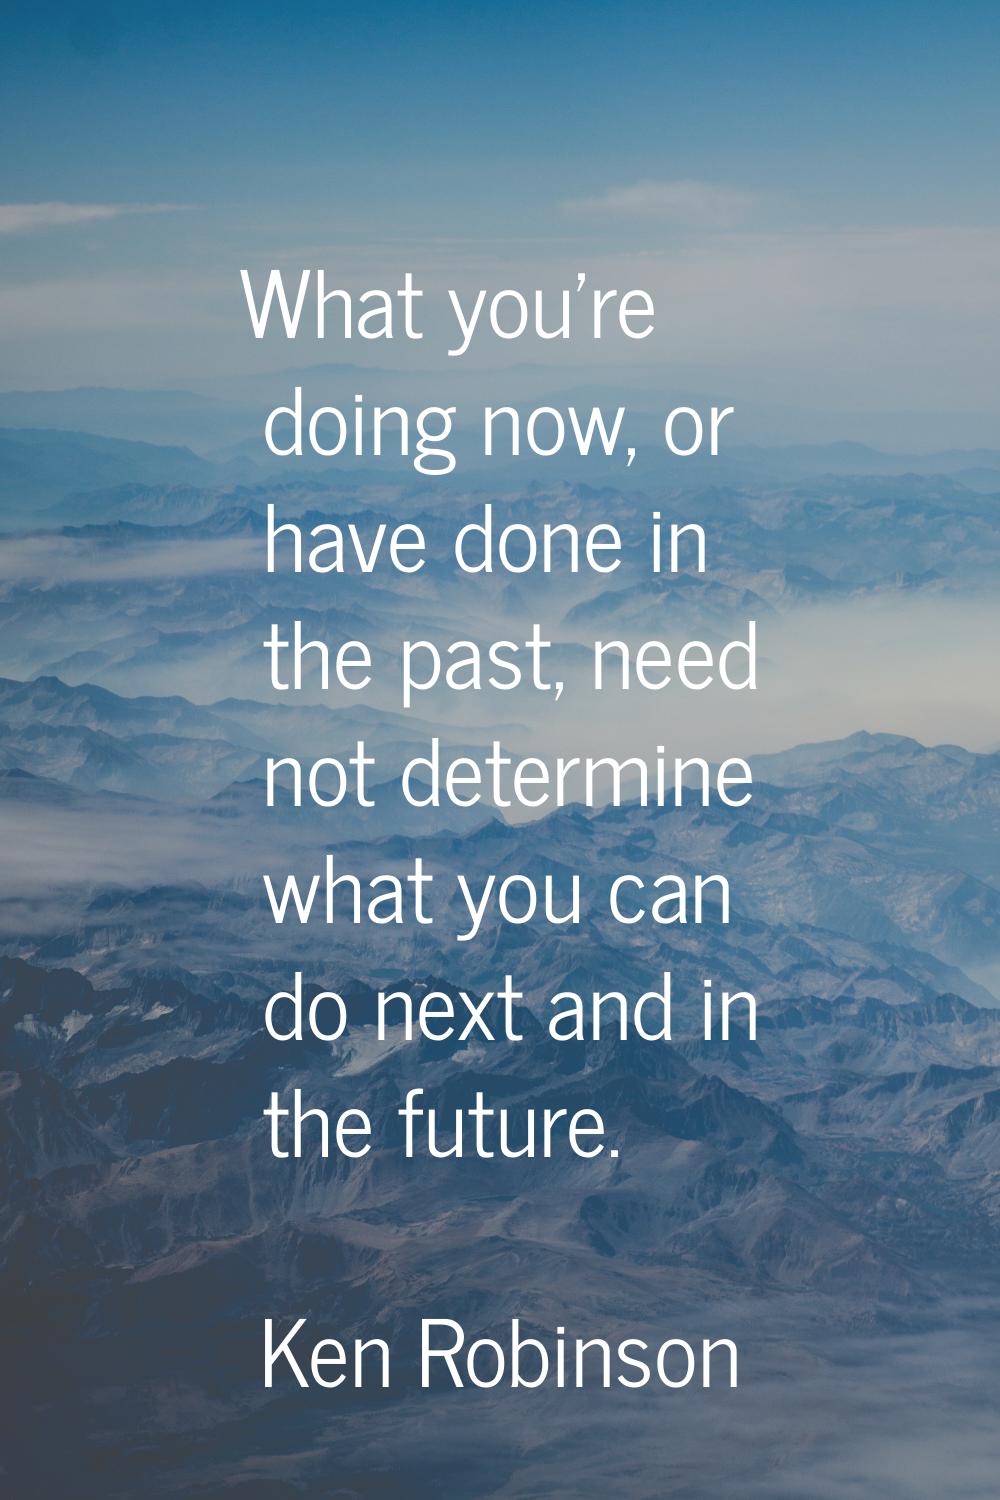 What you're doing now, or have done in the past, need not determine what you can do next and in the